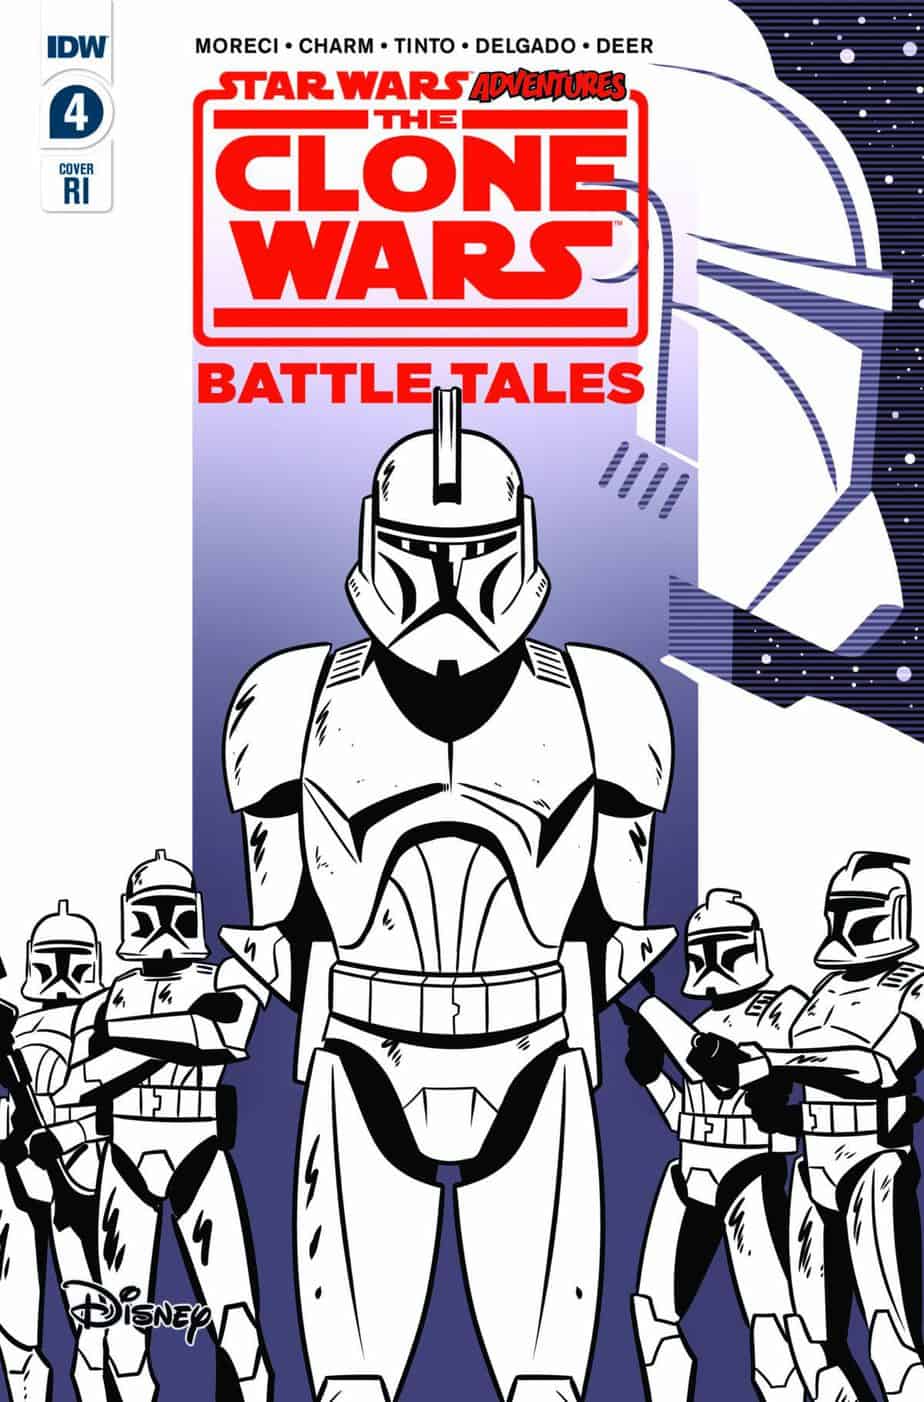 STAR WARS ADVENTURES: CLONE WARS – Battle Tales #4 - Retailer Incentive Cover